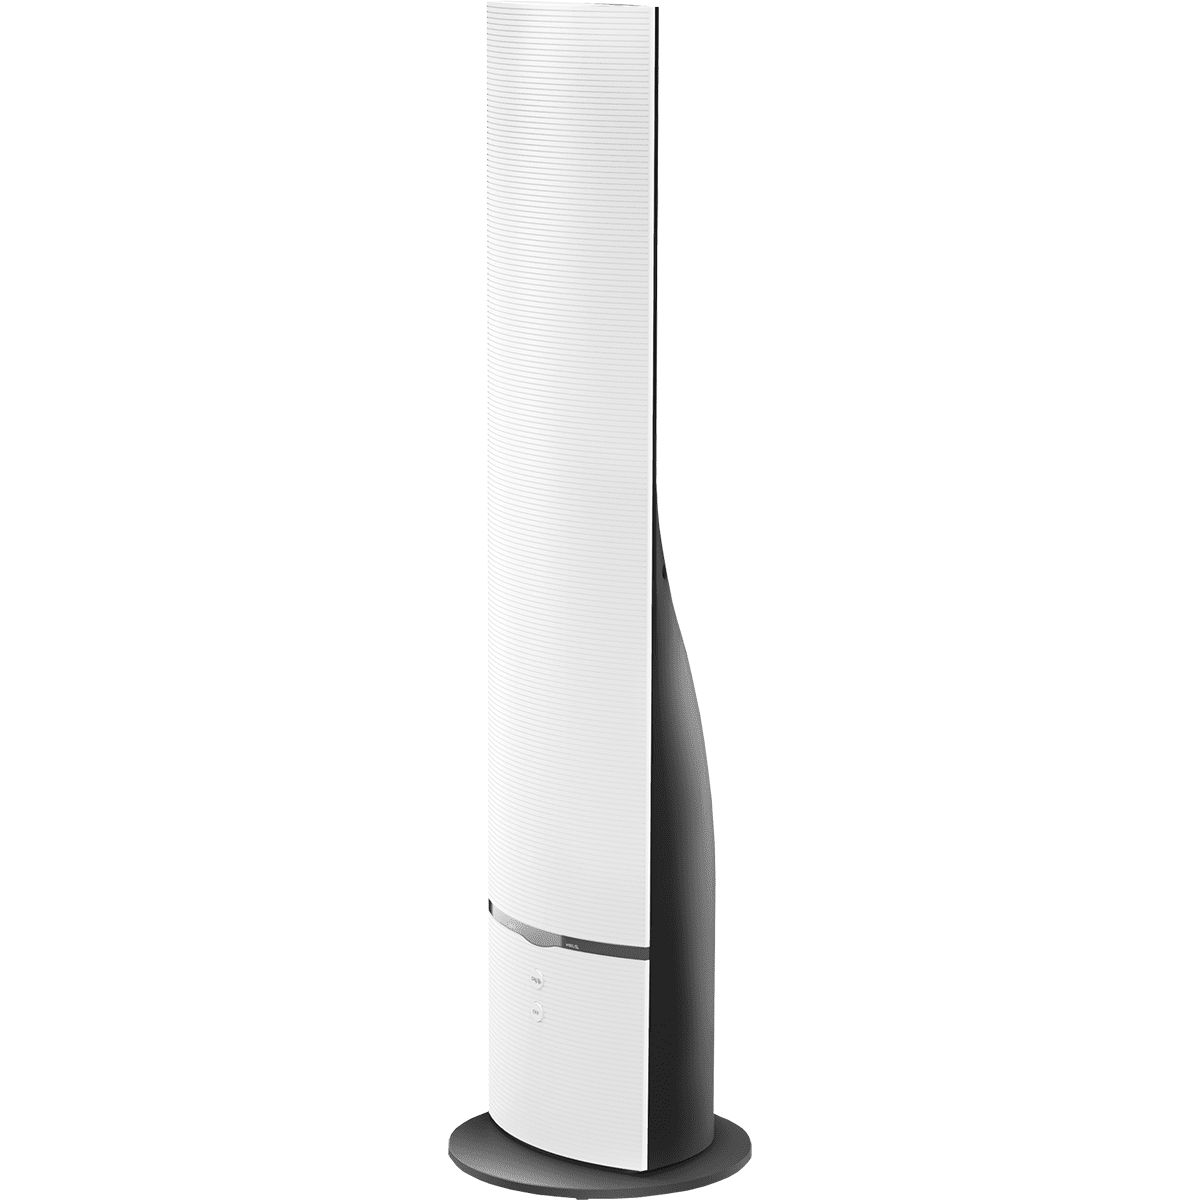 Objecto H9 Tower Hybrid Humidifier - White